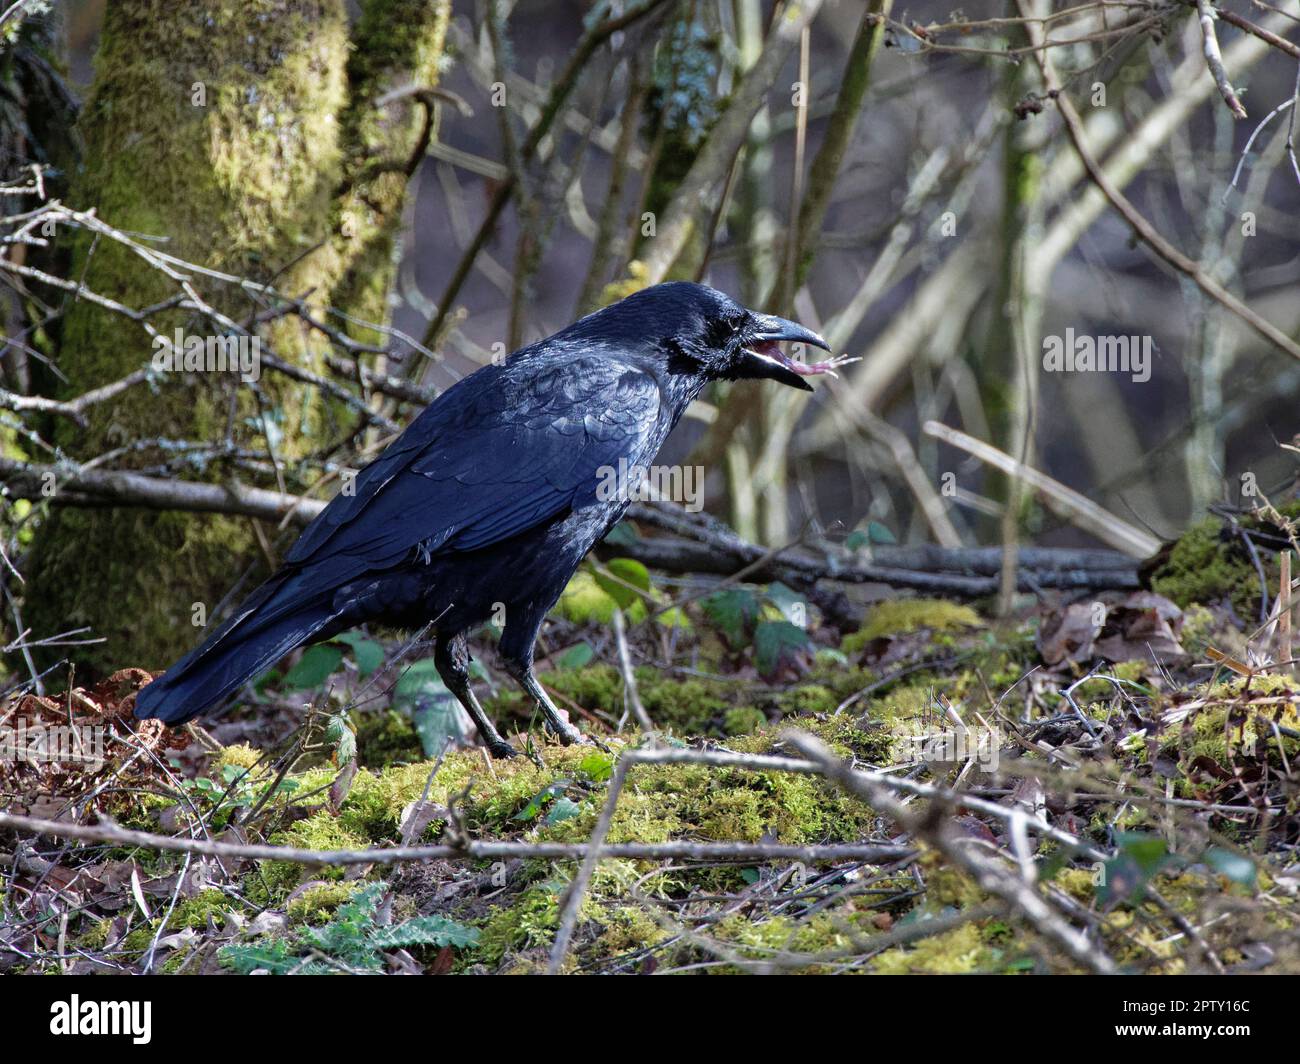 Carrion crow (Corvus corone) swallowing a skinned back leg of a European toad (Bufo bufo) free from toxic skin, Forest of Dean, Gloucestershire, UK. Stock Photo